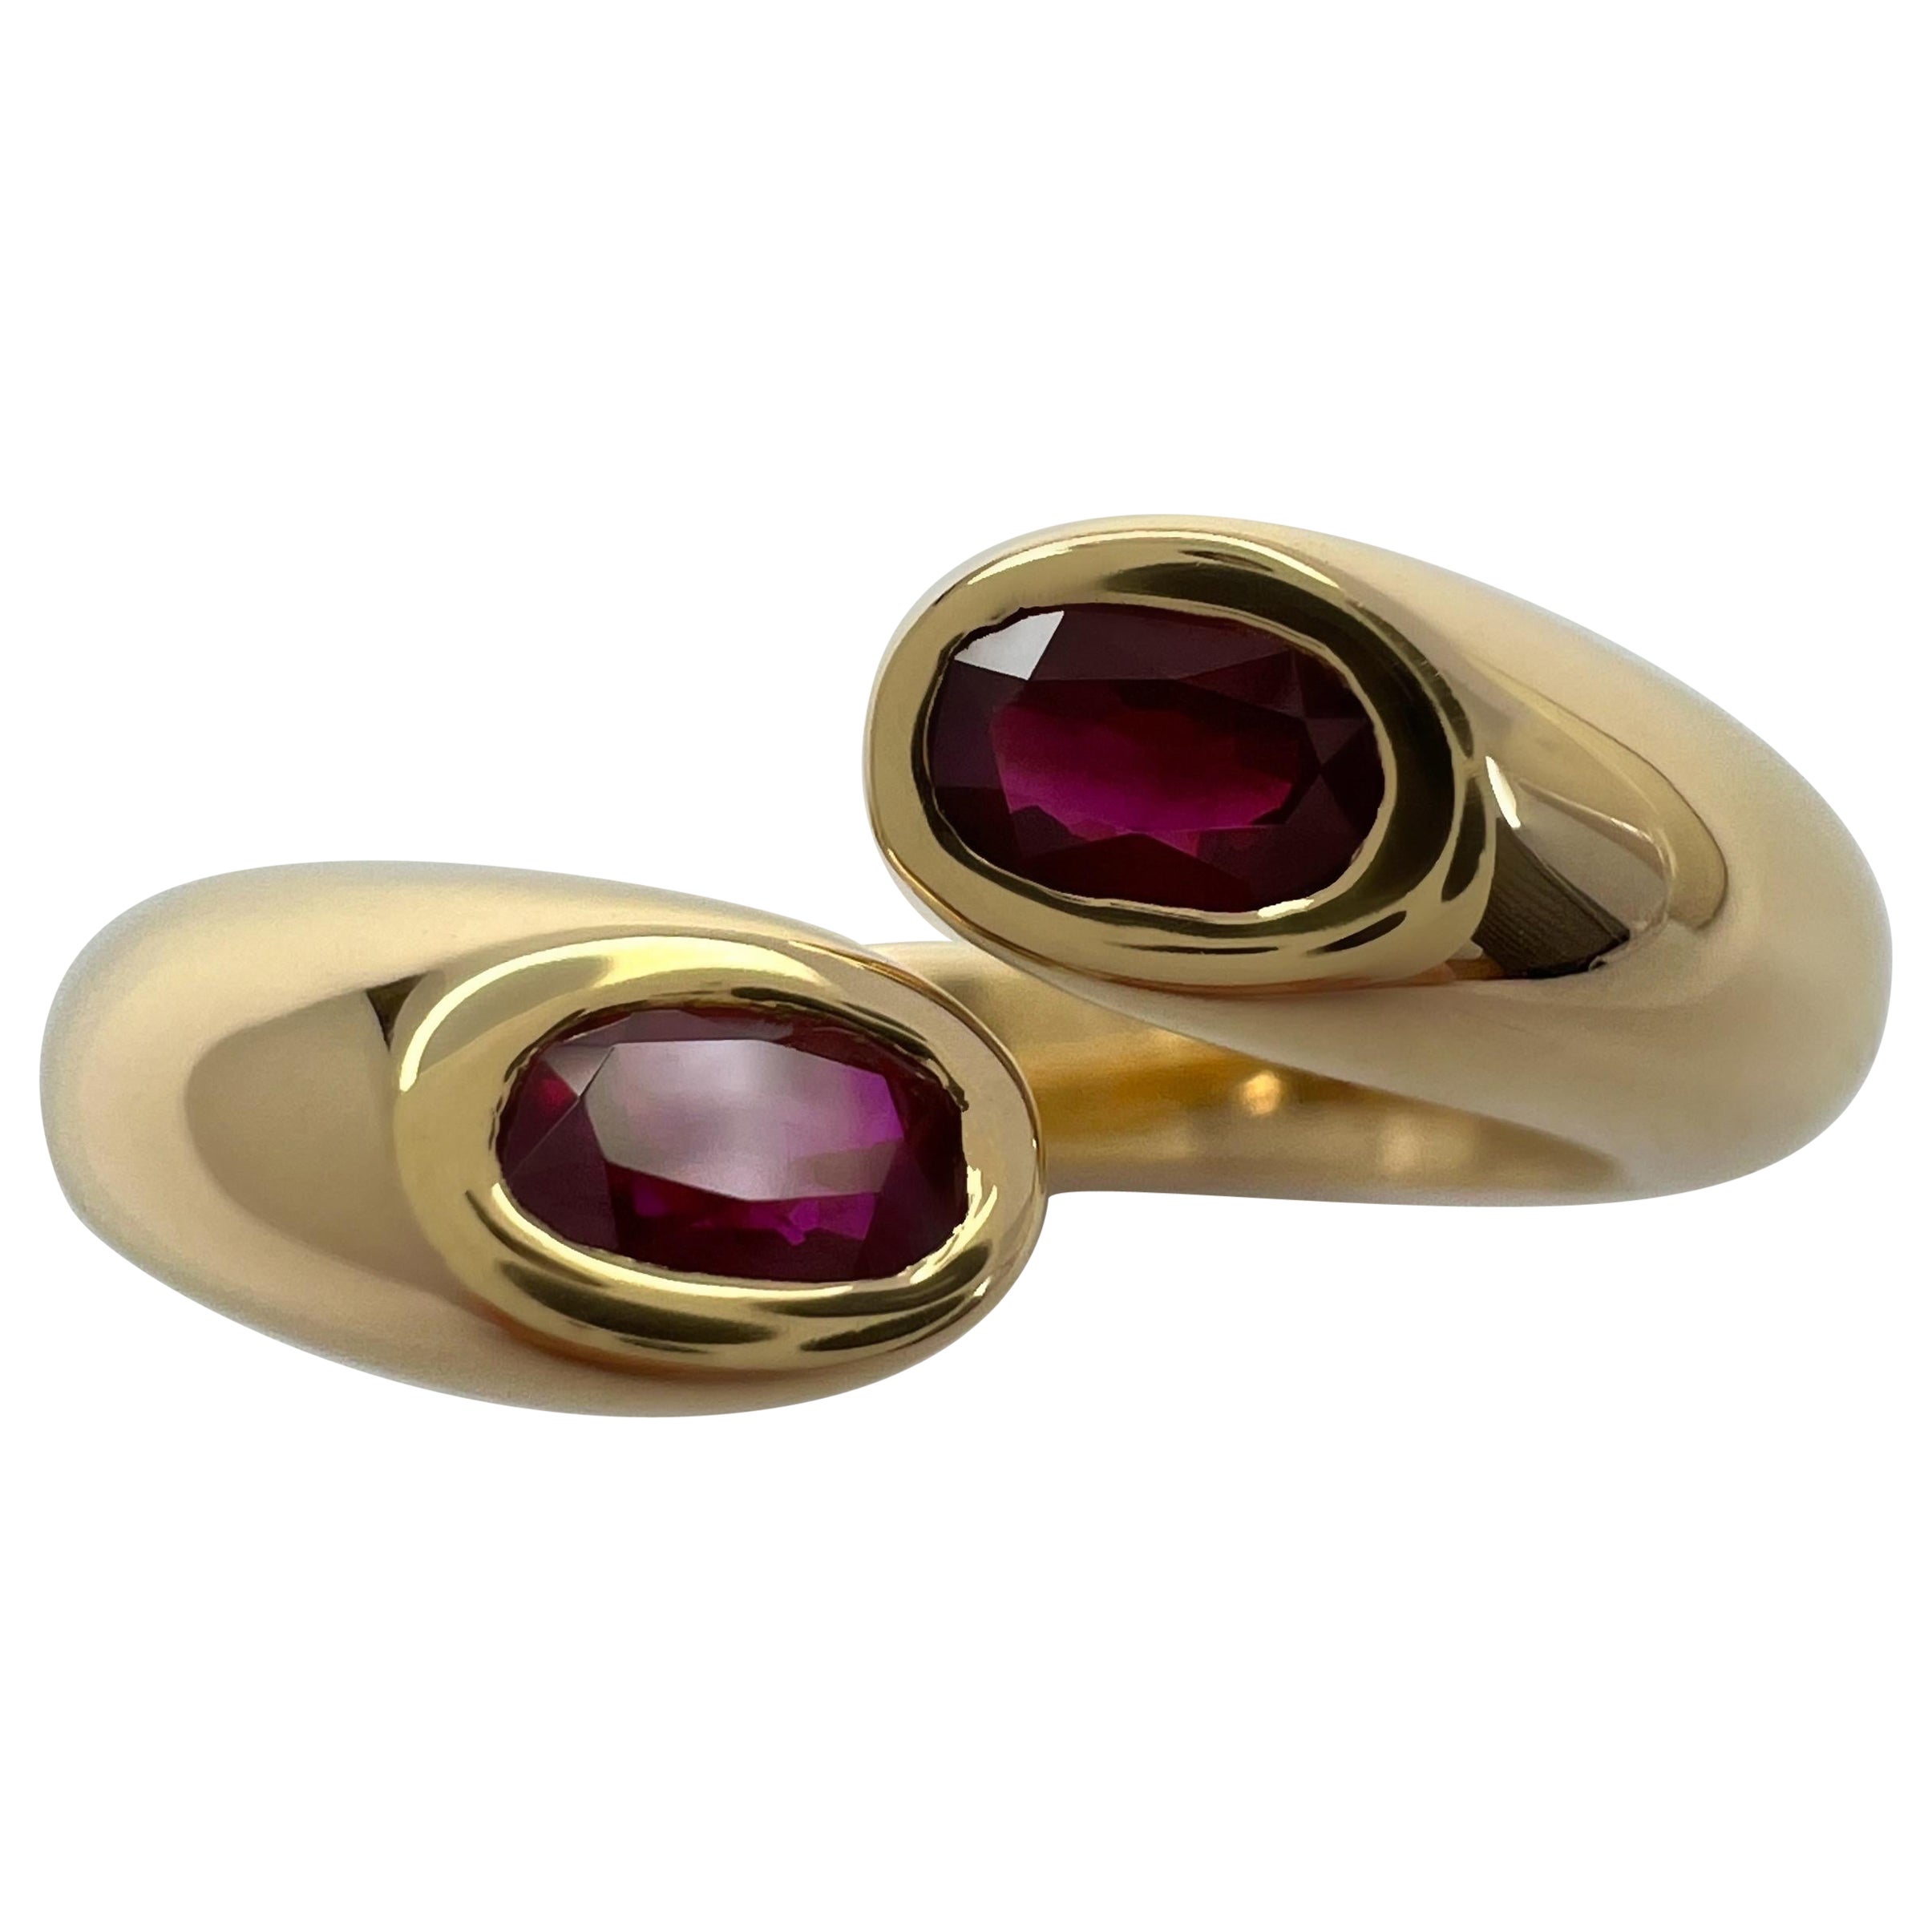 Rare Vintage Cartier Red Ruby Ellipse Oval Cut 18k Gold Bypass Split Ring 6 52